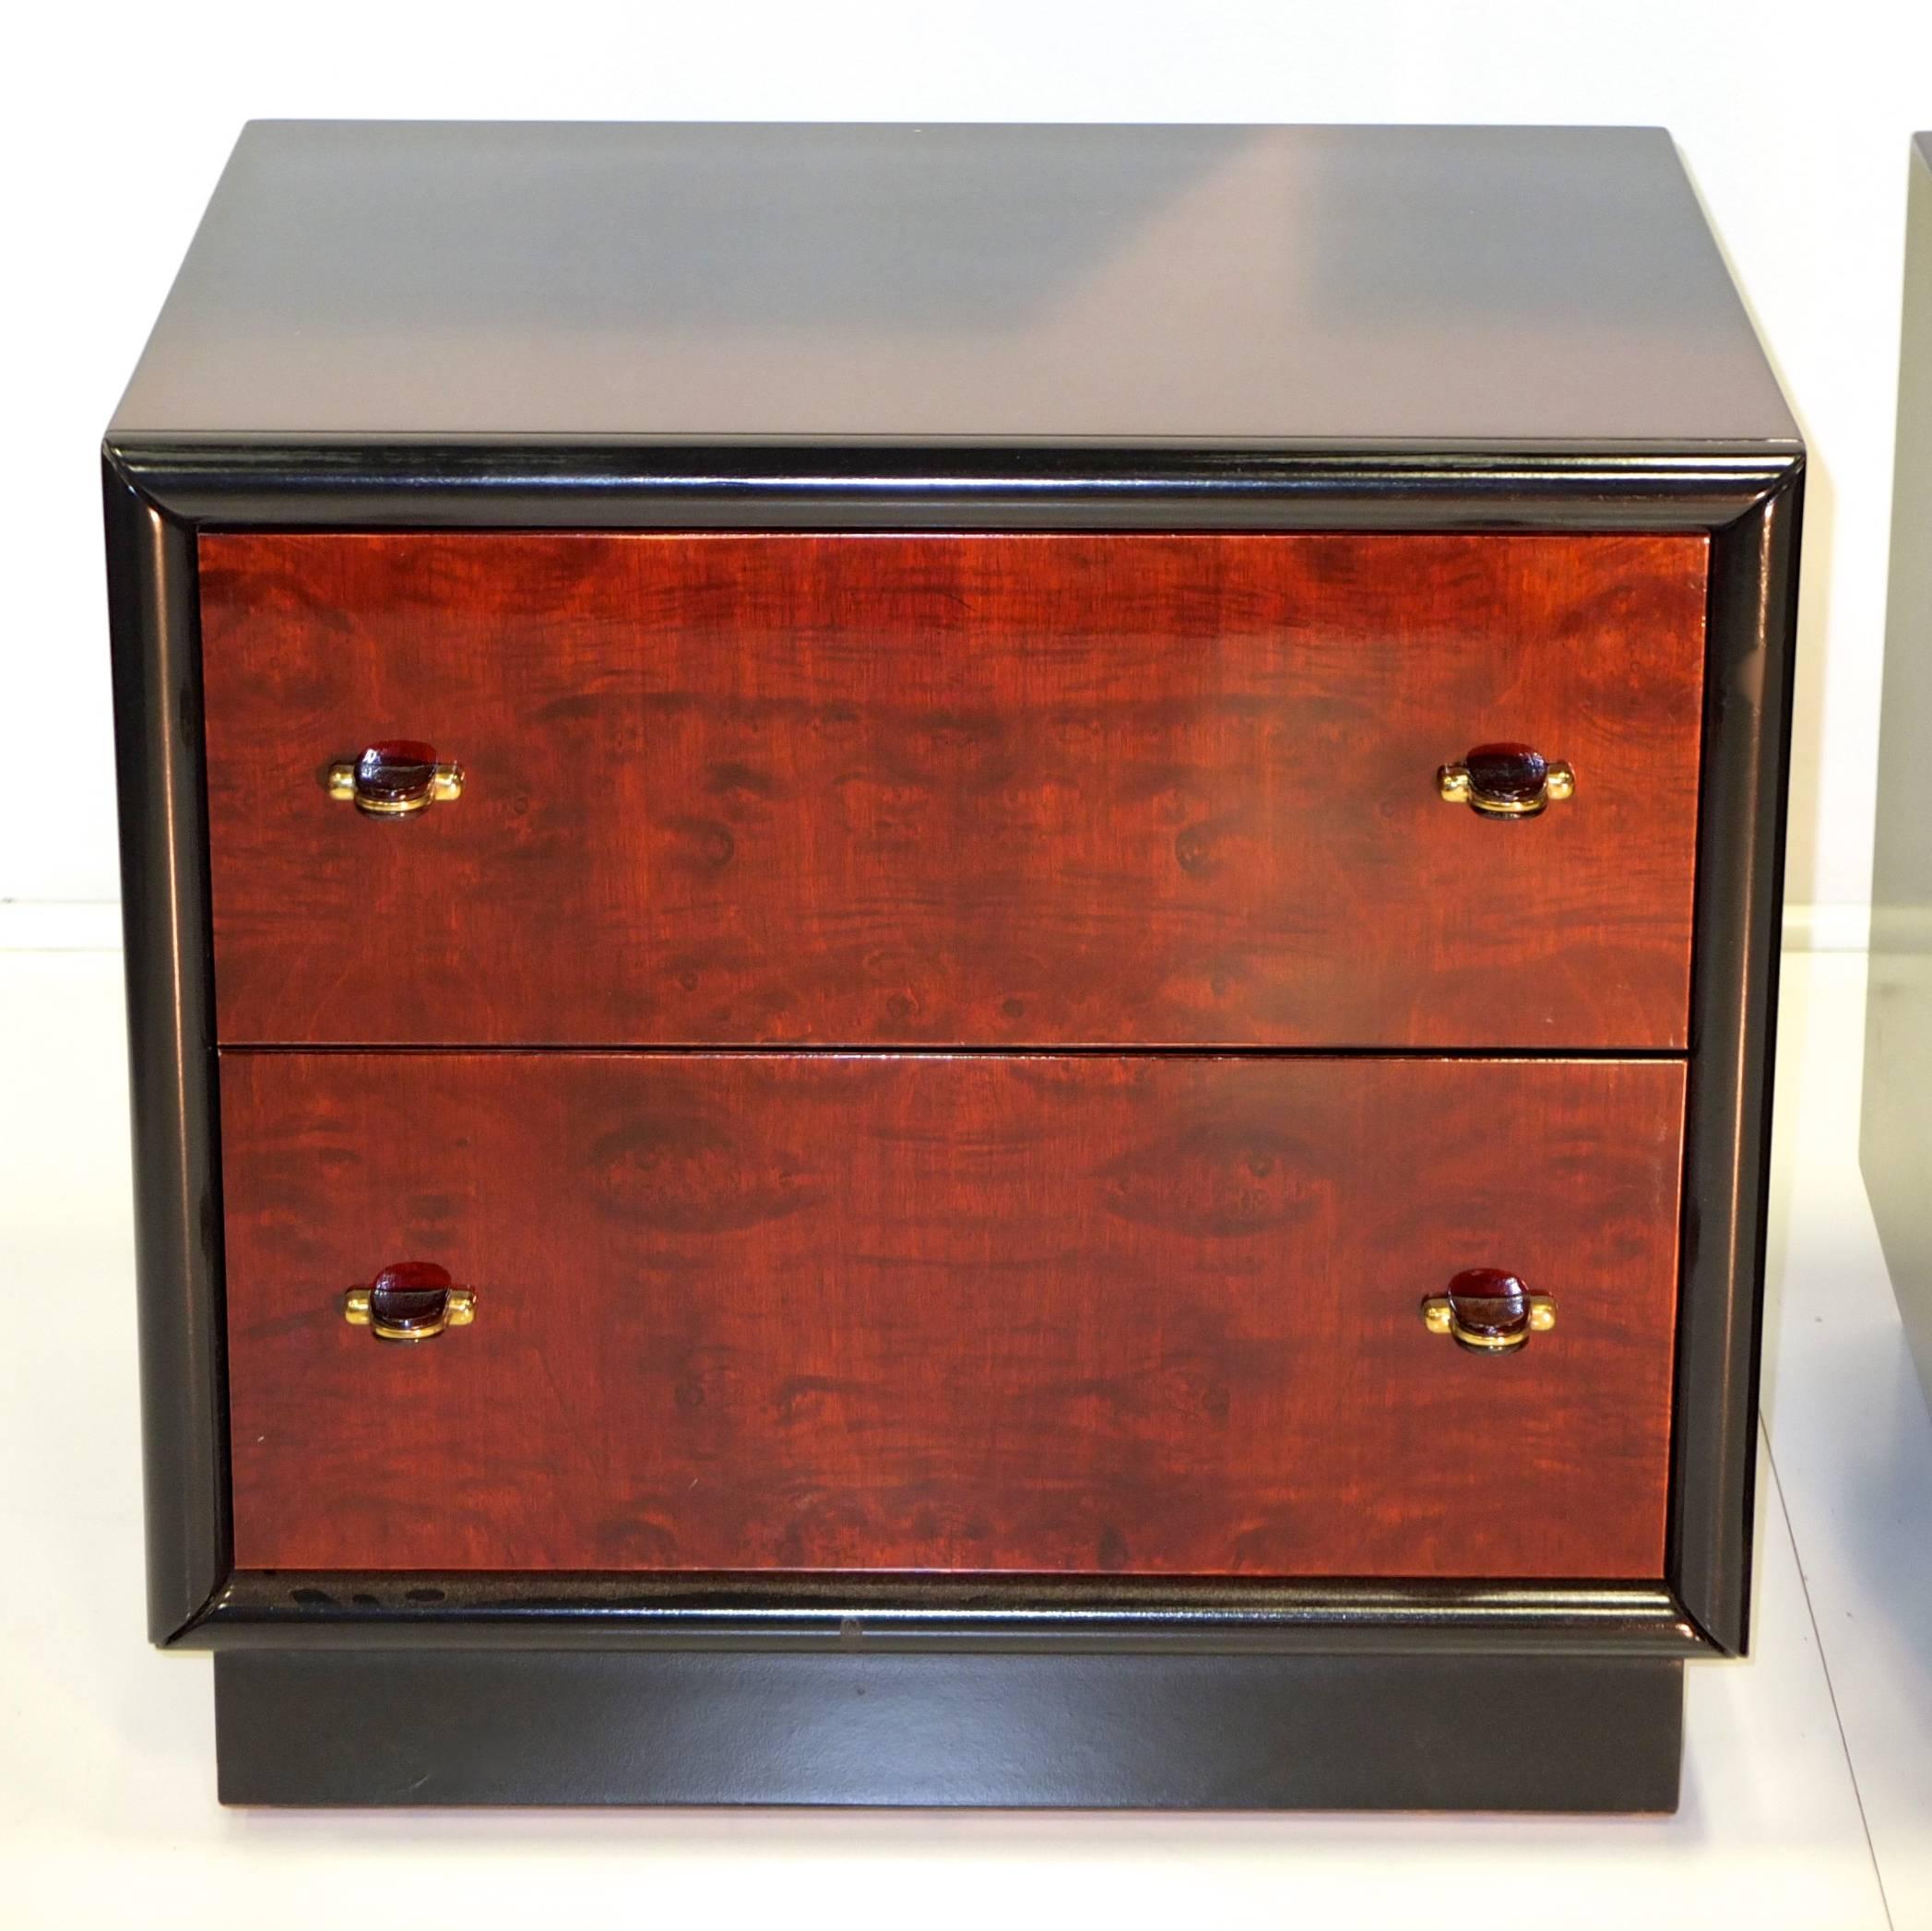 Pair of two-drawer bedside chests in black lacquer with burl drawer faces by Henredon from their 1970s Scene Three collection.

Freshly restored.